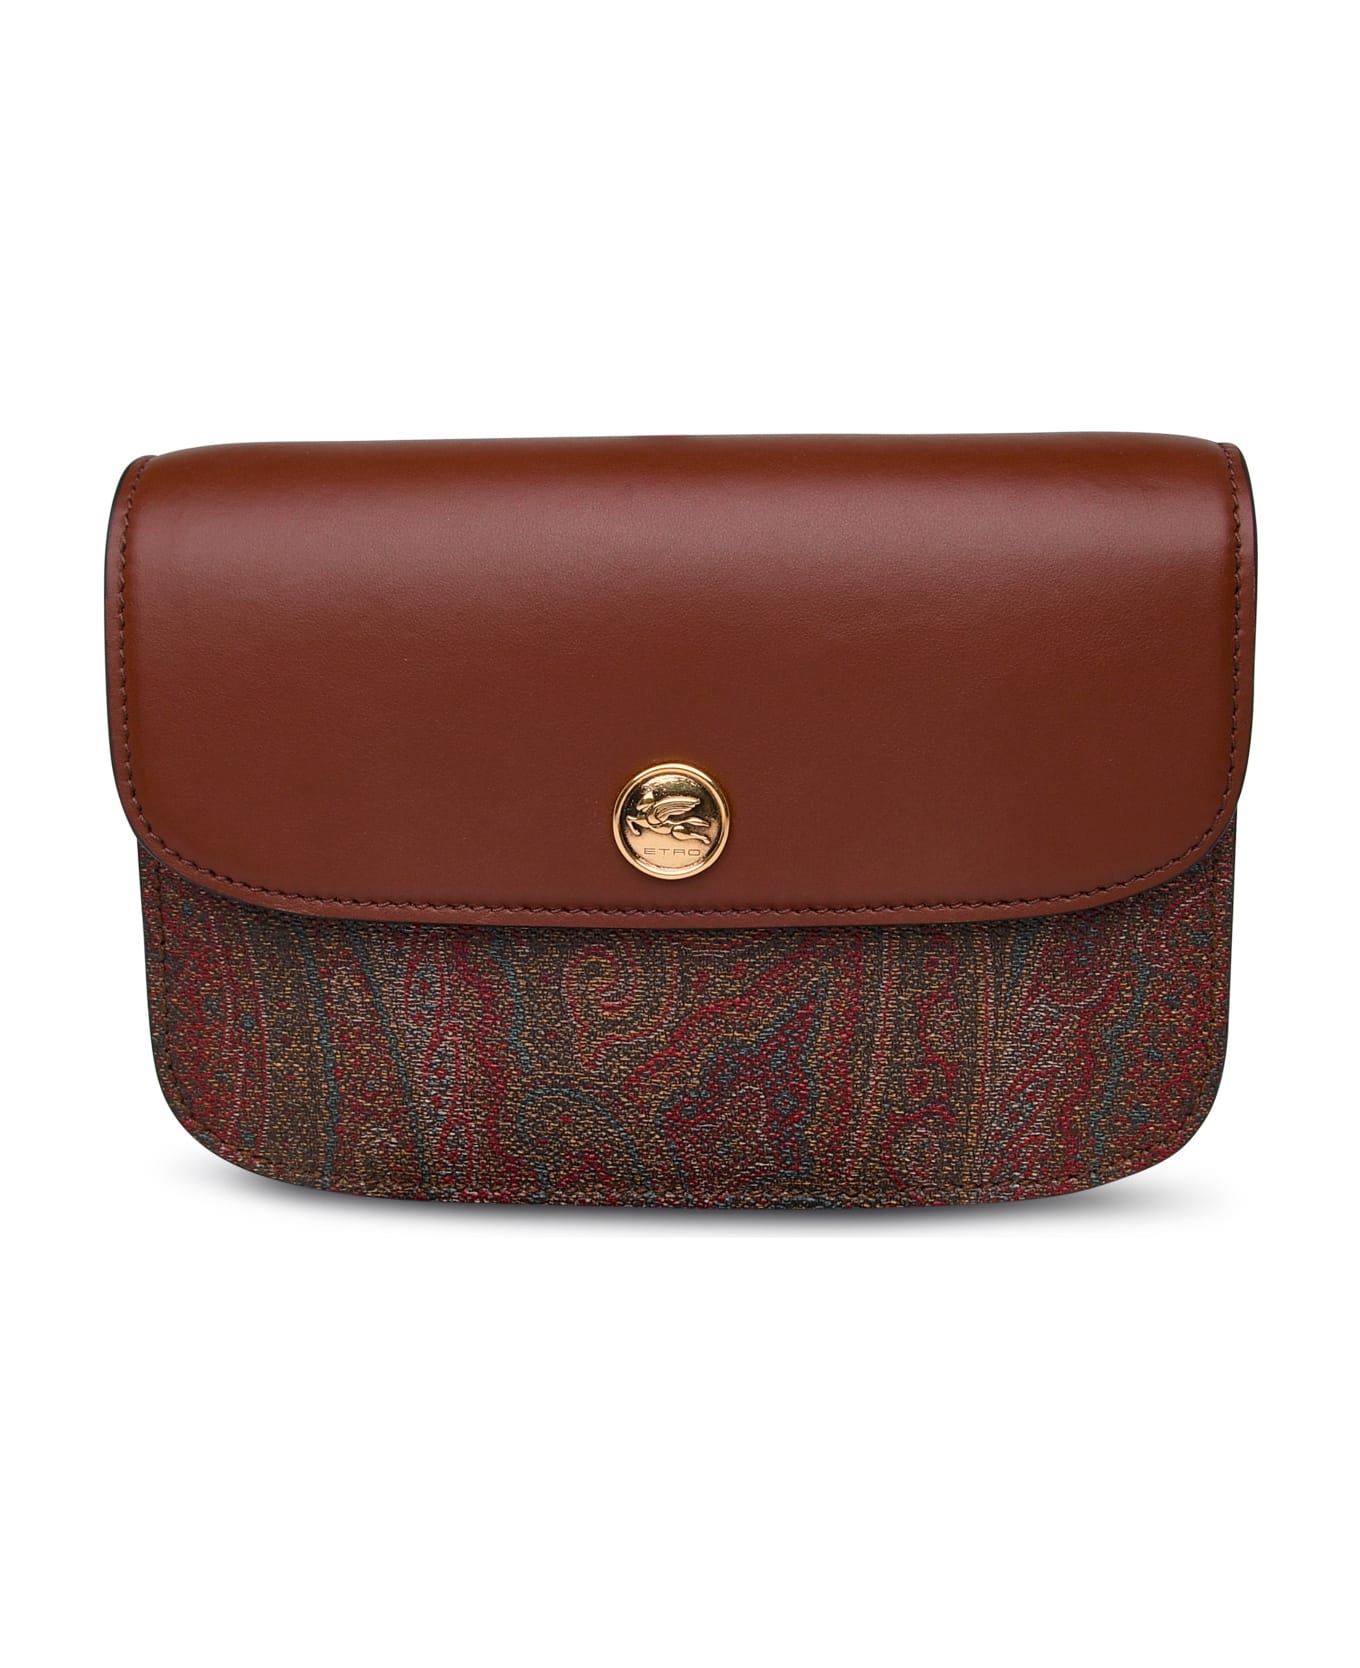 Etro Essential Bag In Brown Cotton Blend - Brown ショルダーバッグ